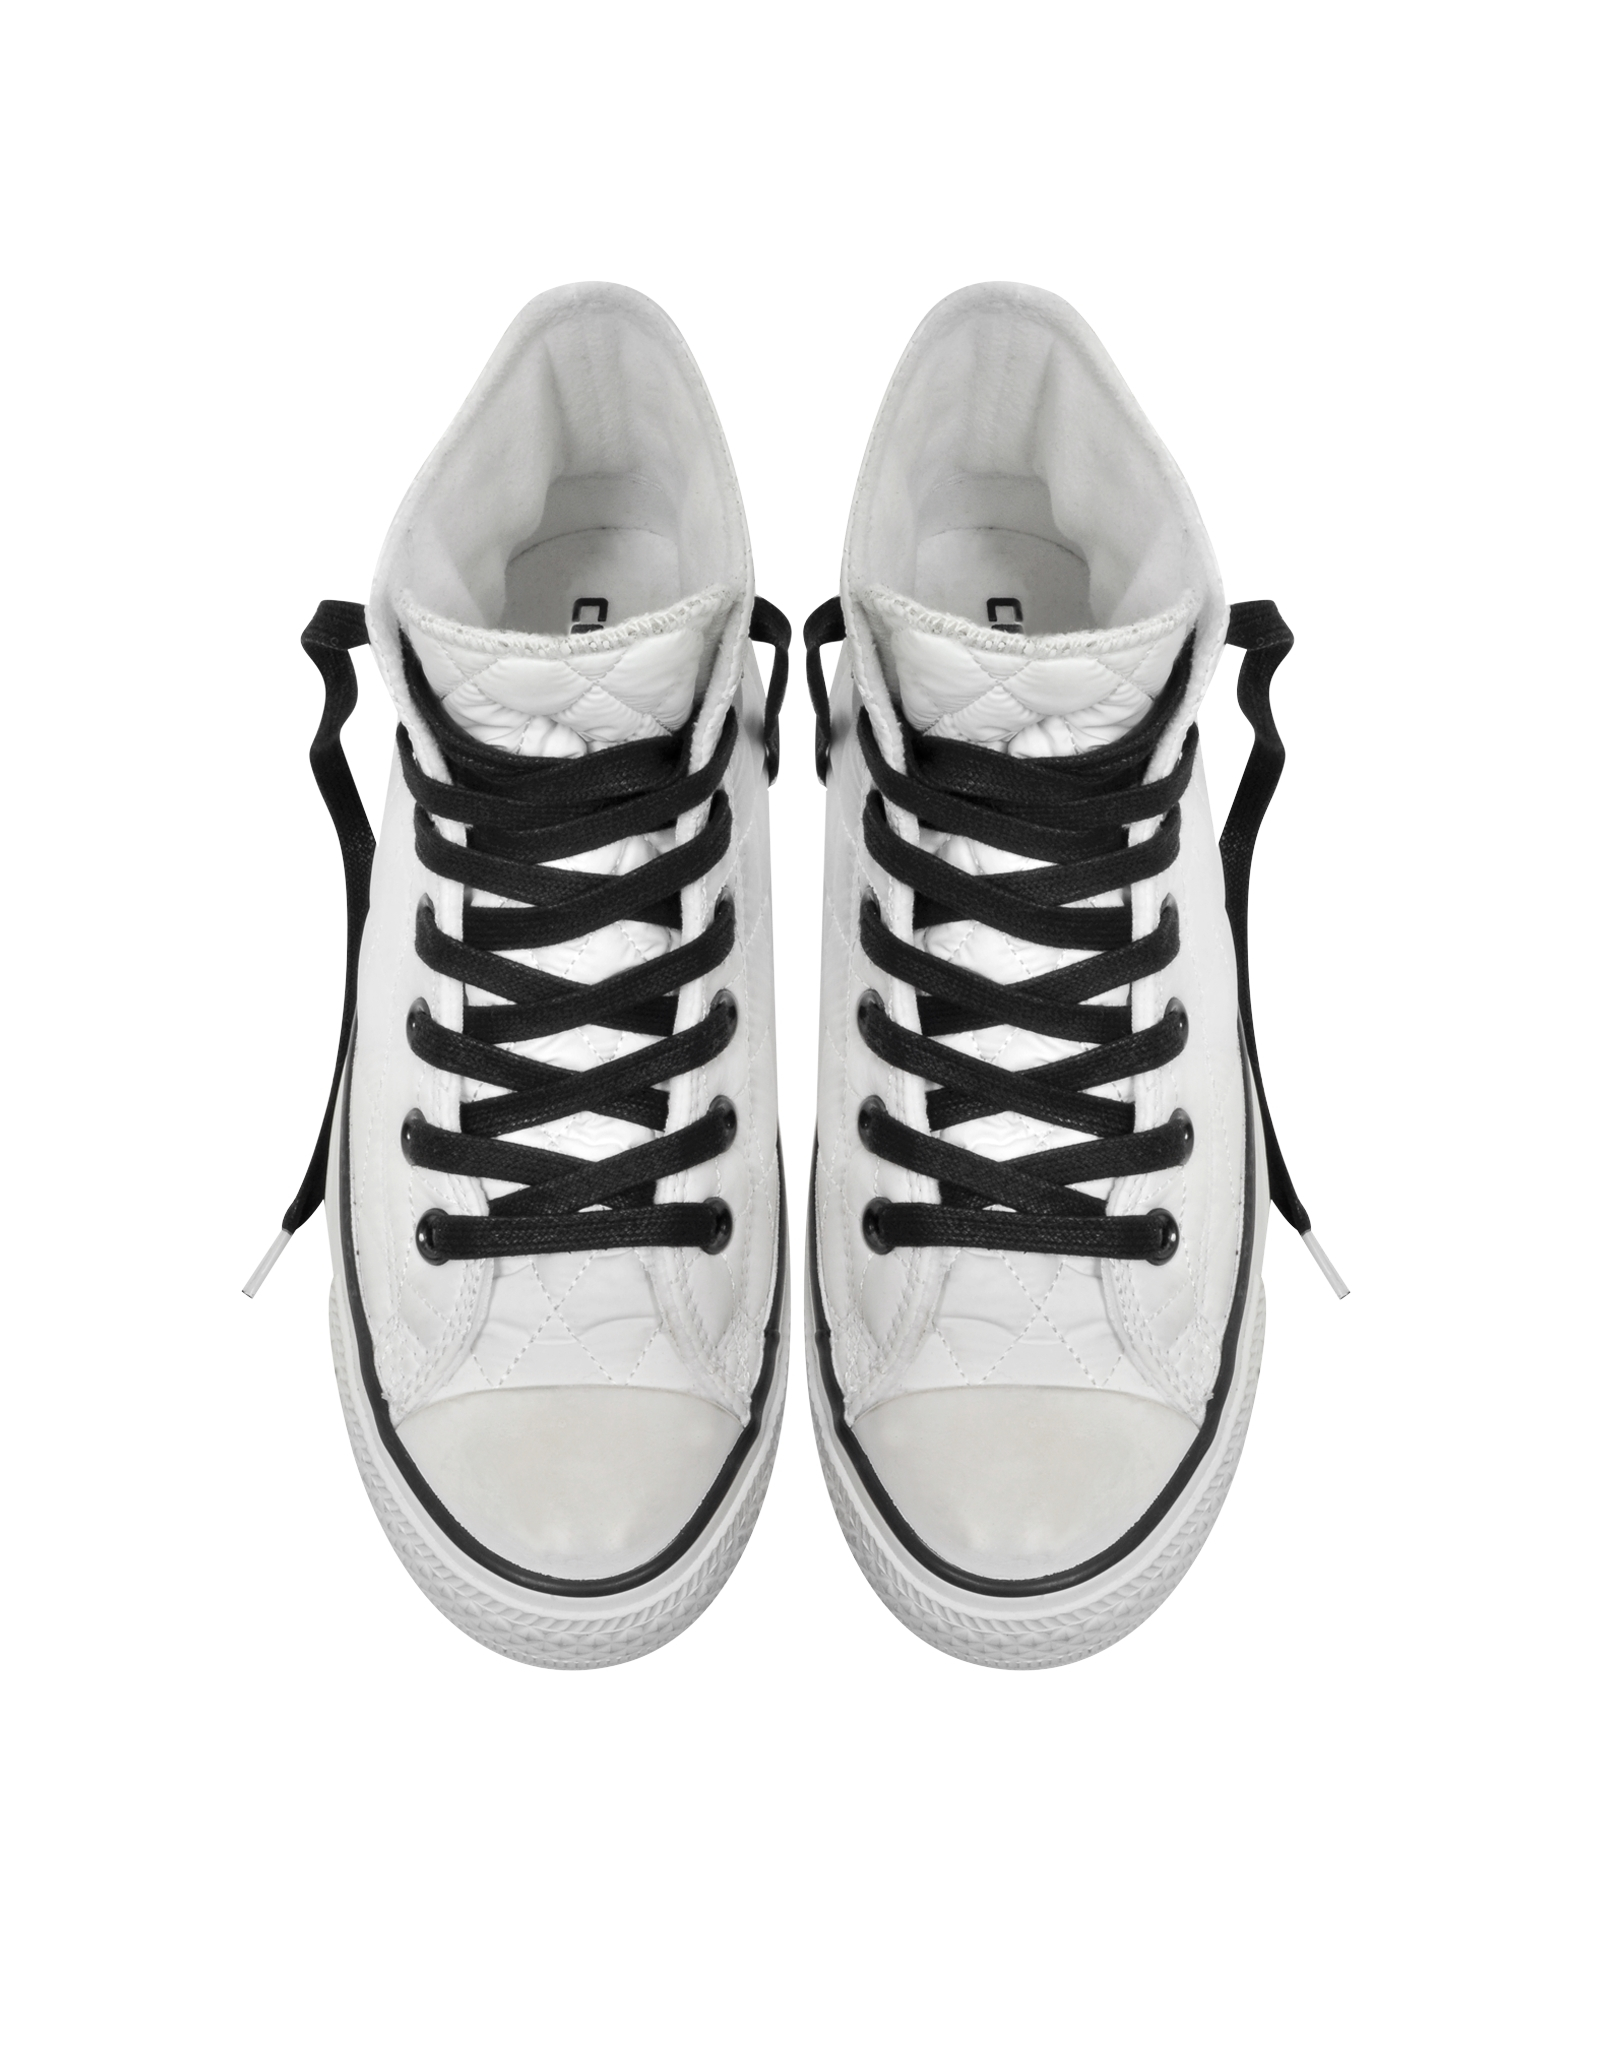 Lyst - Converse All Star Hi White Quilted Fabric Sneaker in White